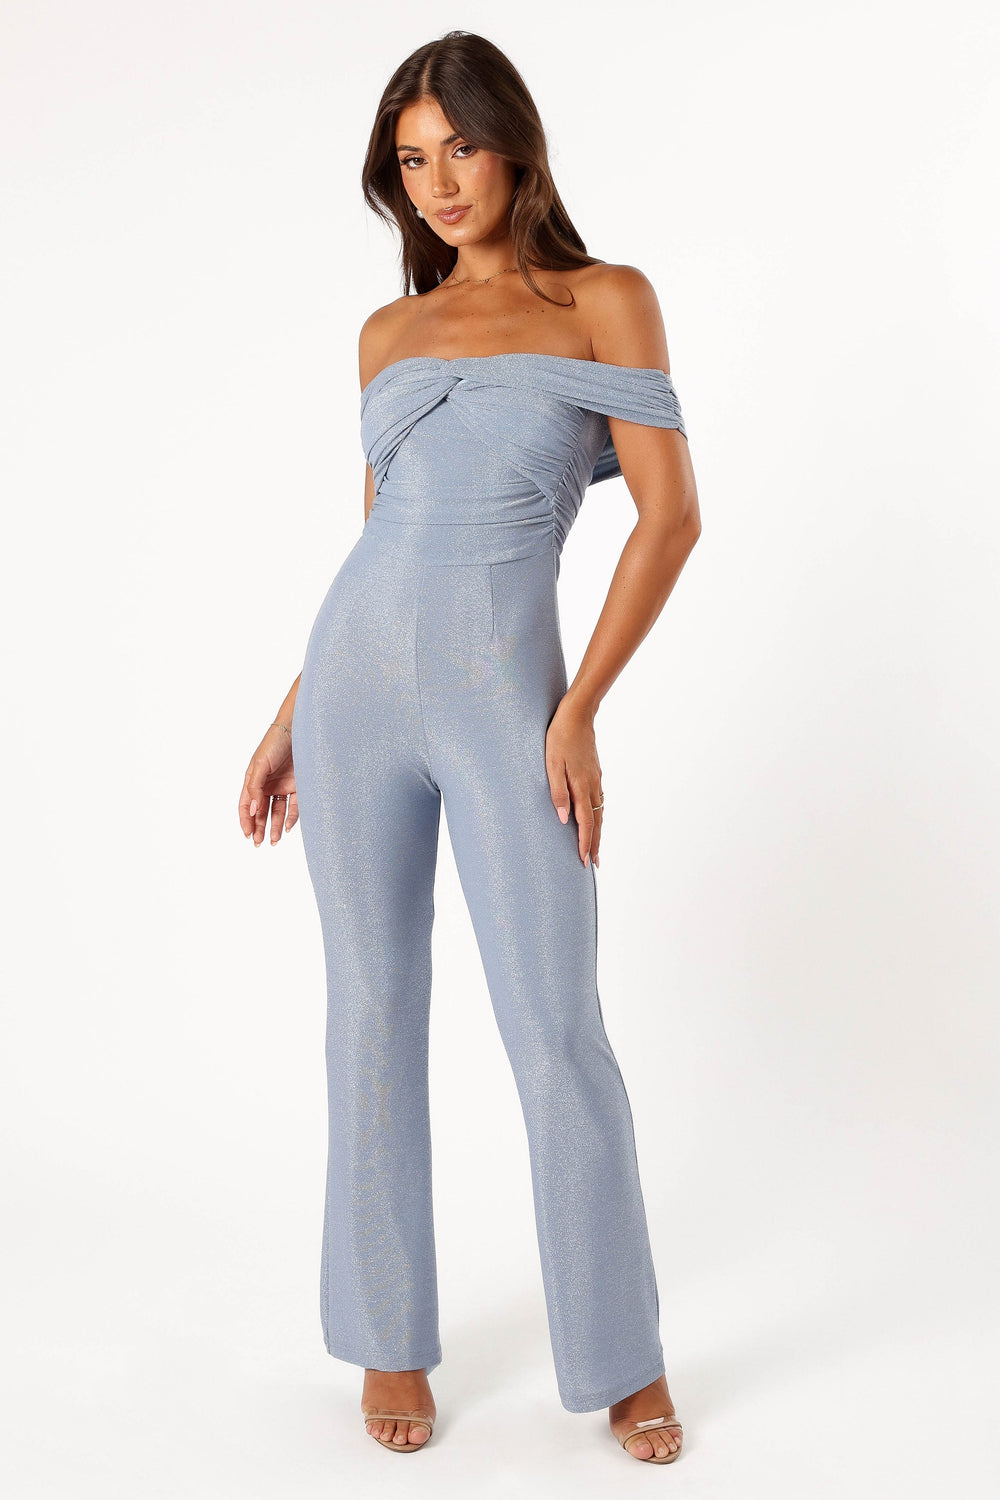 Petal and Pup USA Rompers Sharnie Off Shoulder Jumpsuit - Blue